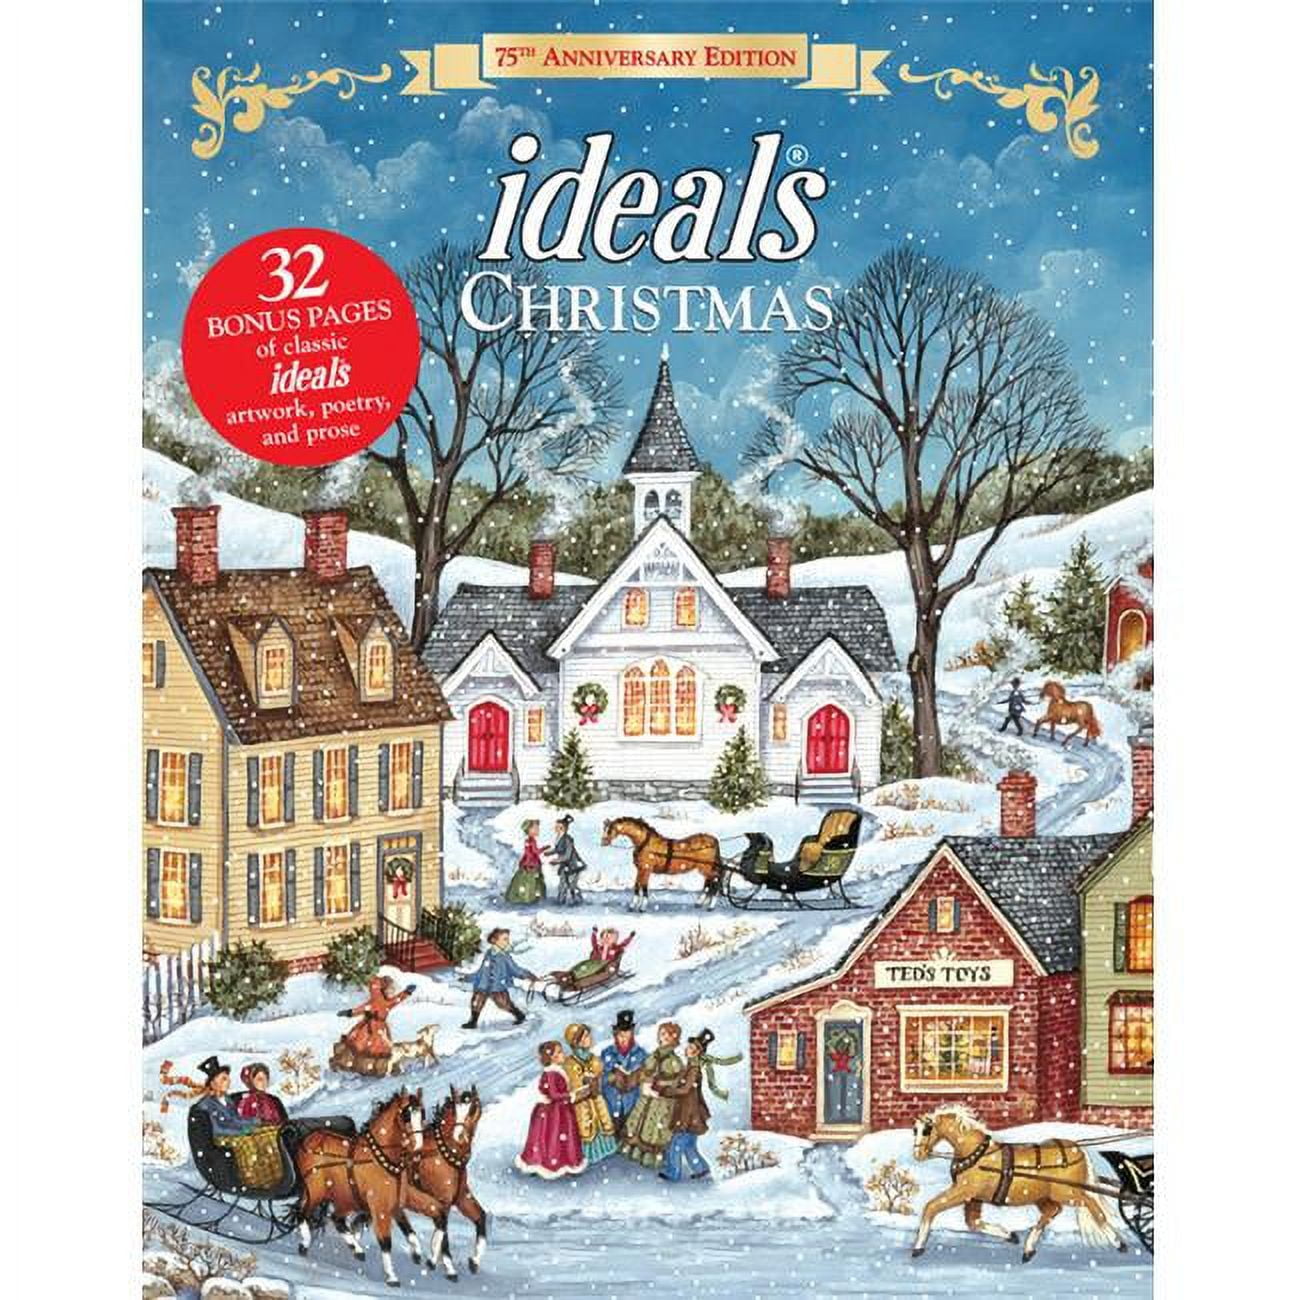 Worthy Inspired 147822 Christmas Ideals 2019 - 75th Anniversary Edition